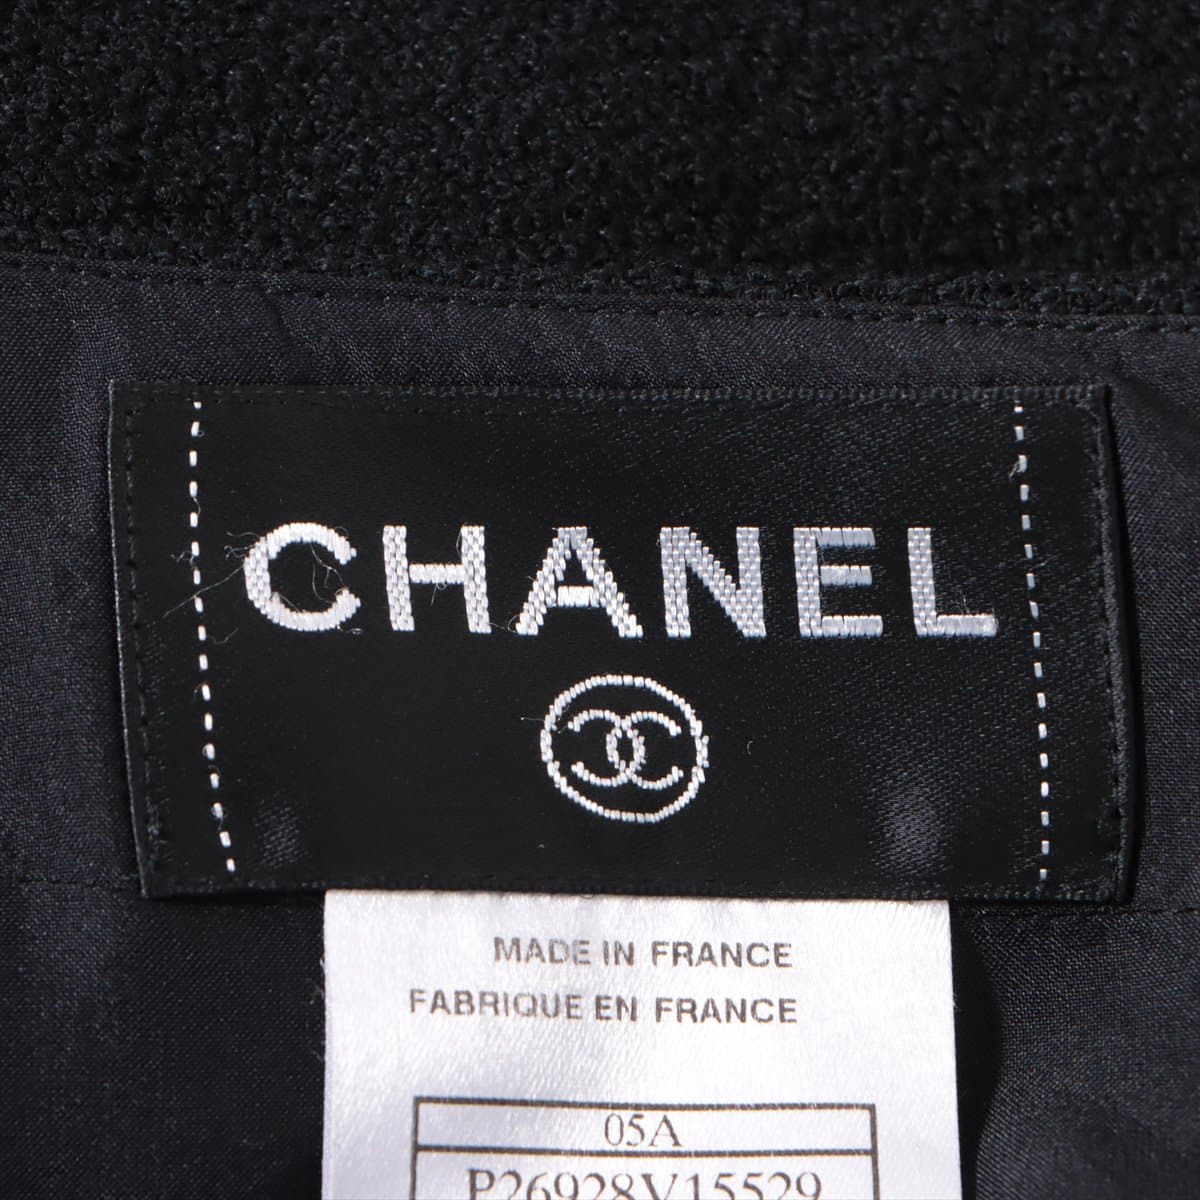 Chanel Coco Mark 05A Cotton & wool Skirt 38 Ladies' Black